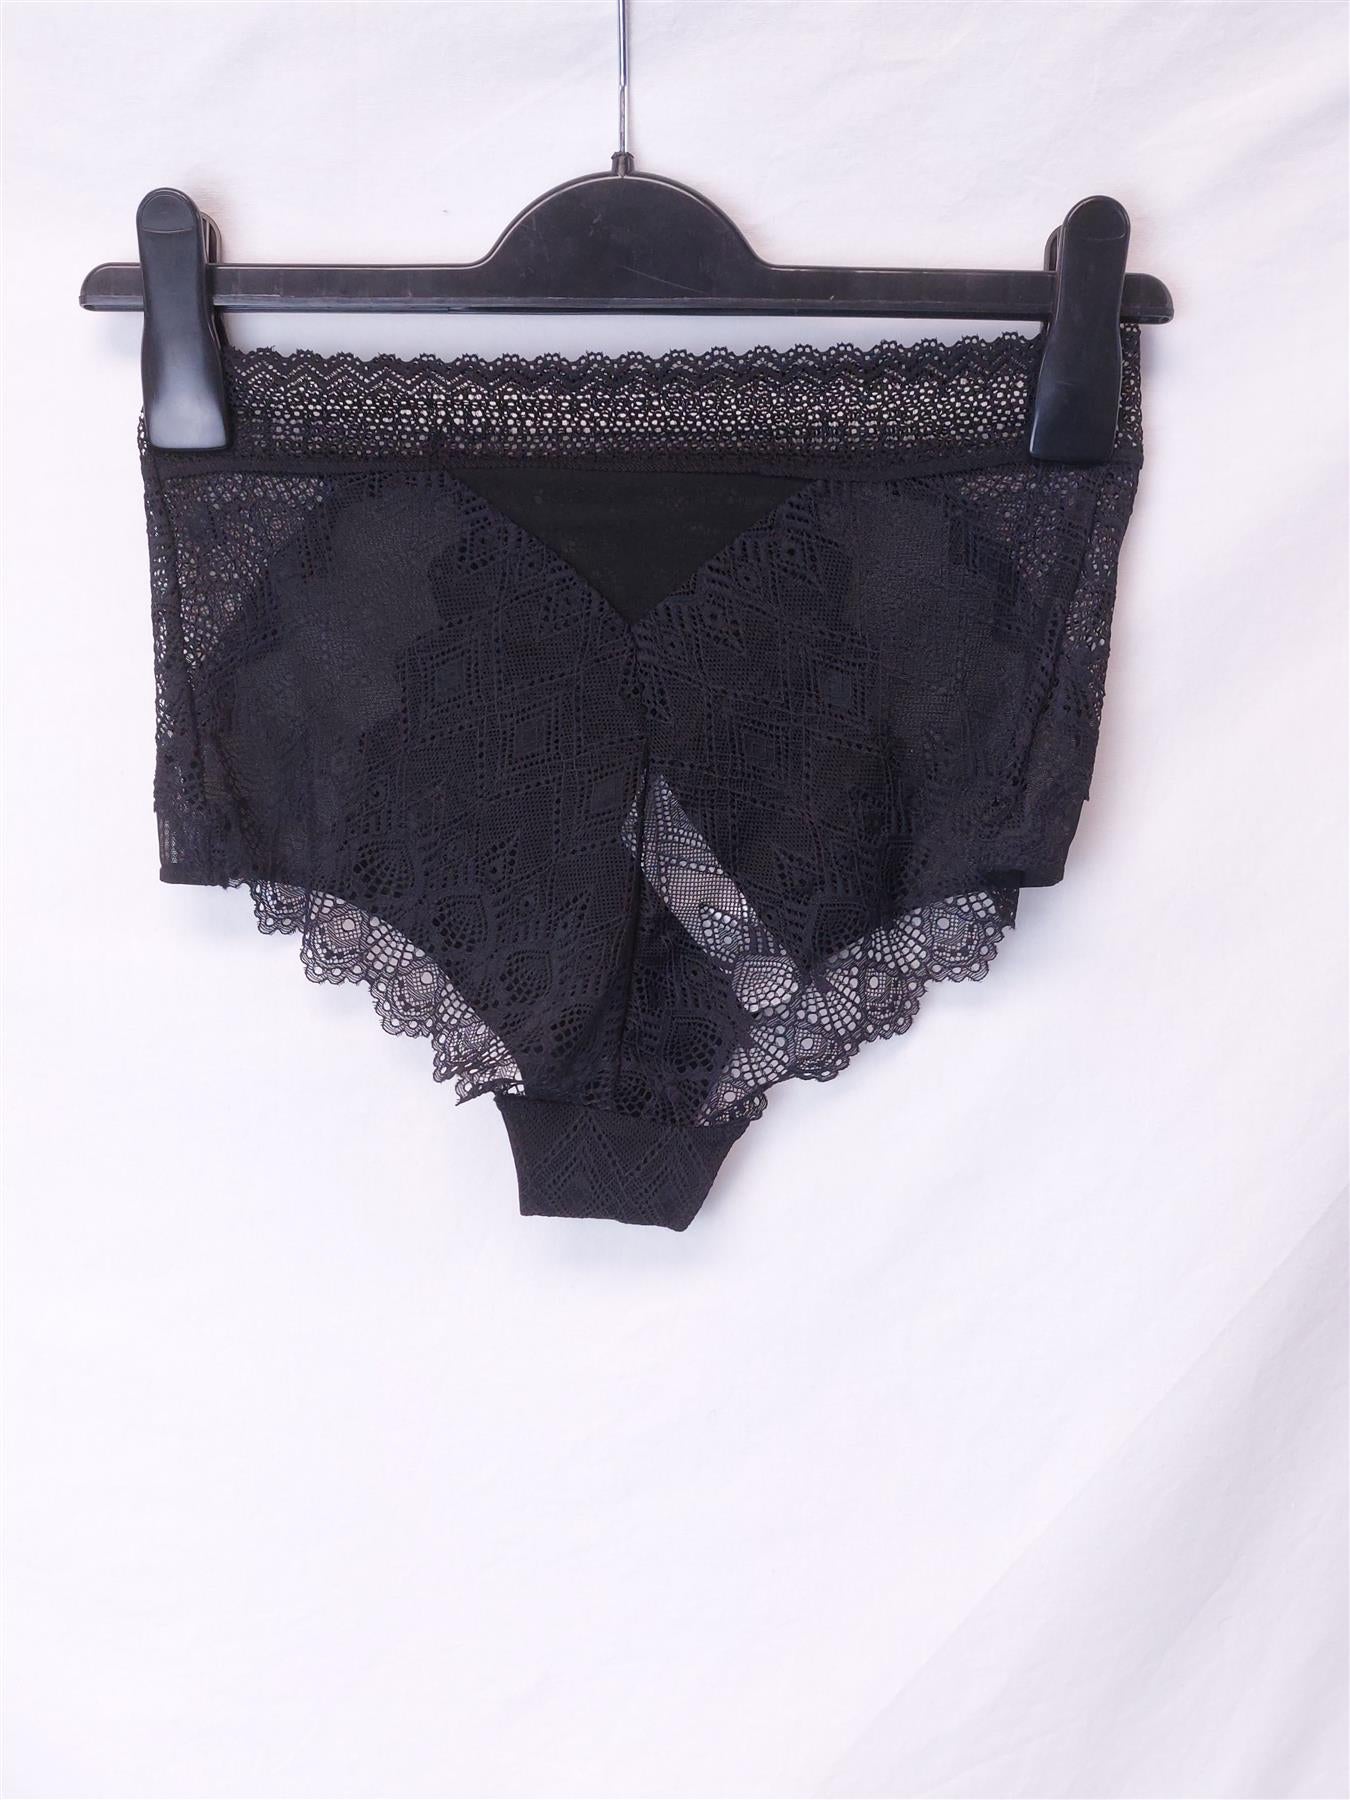 Oysho High Waist Knickers Full Brief Art Deco Lace Cotton Lined Black Size M